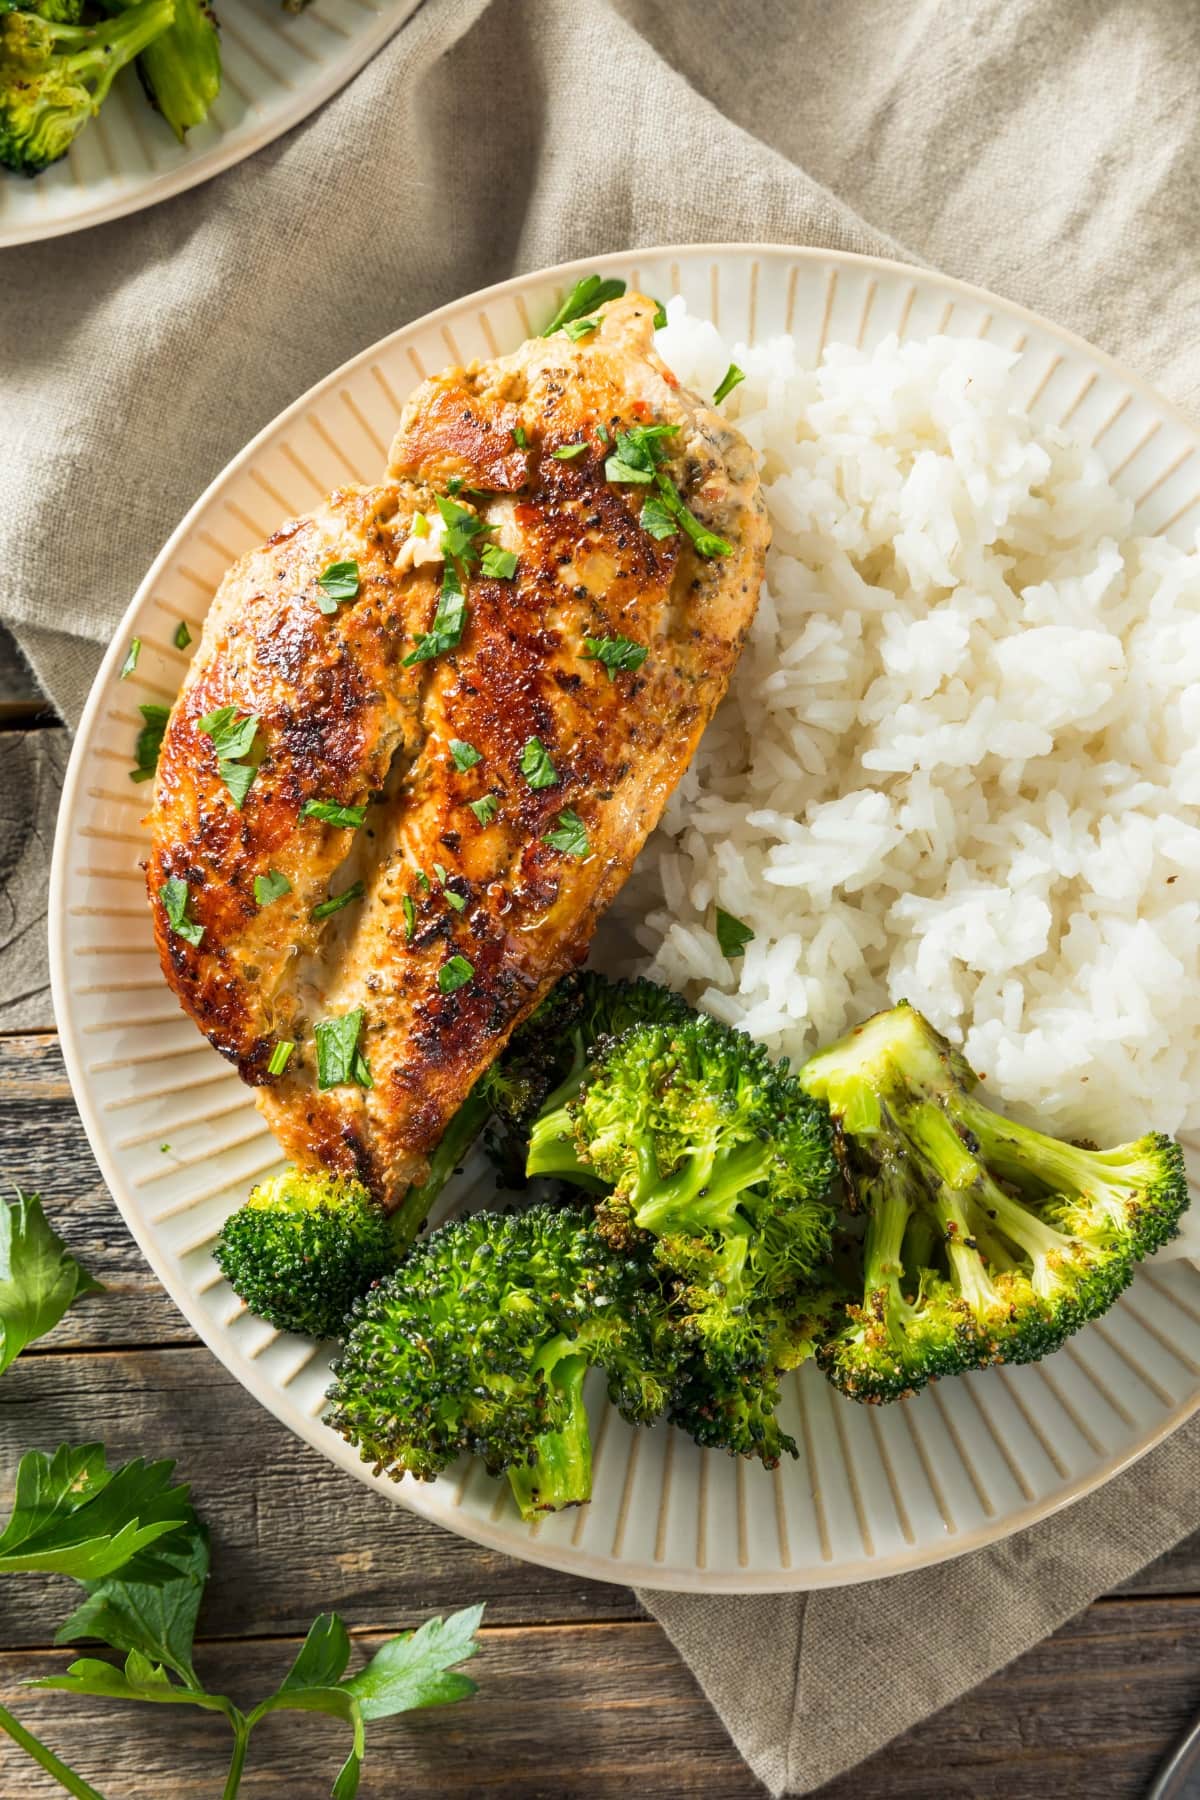 Homemade Baked Chicken Breast with Broccoli and Rice in a Plate